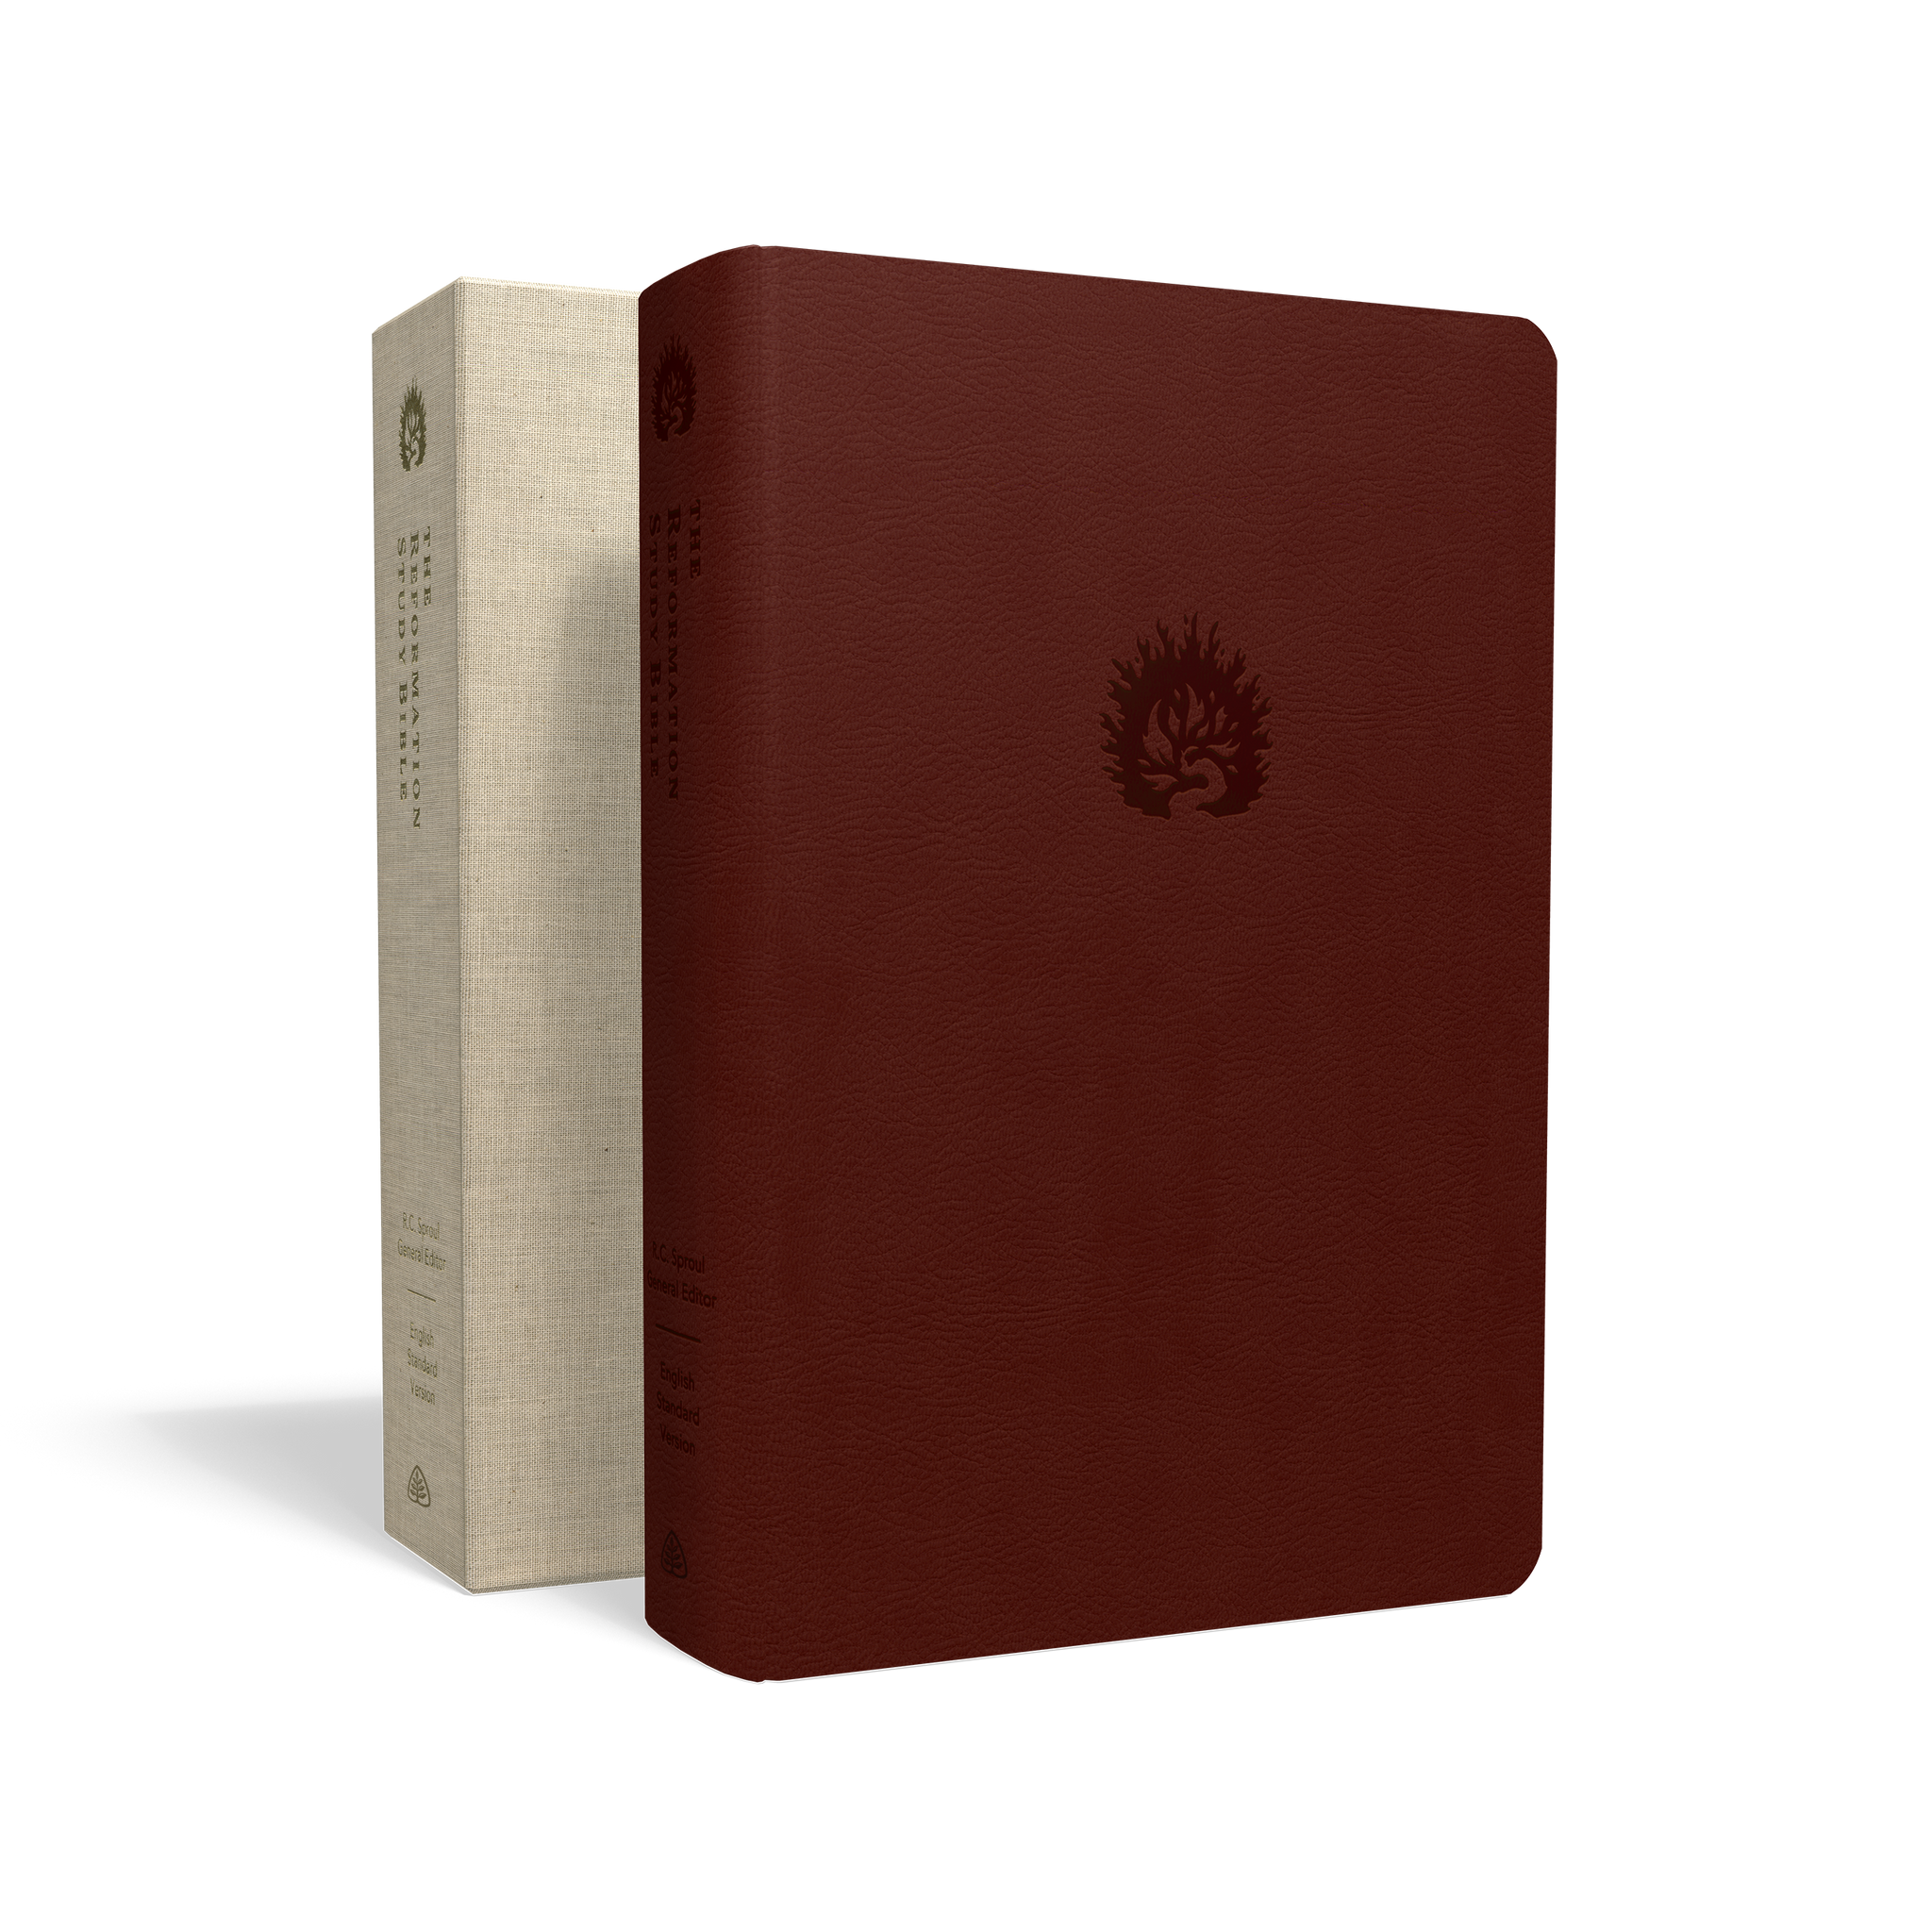 ESV Reformation Study Bible (Leather-like, Brick Red)